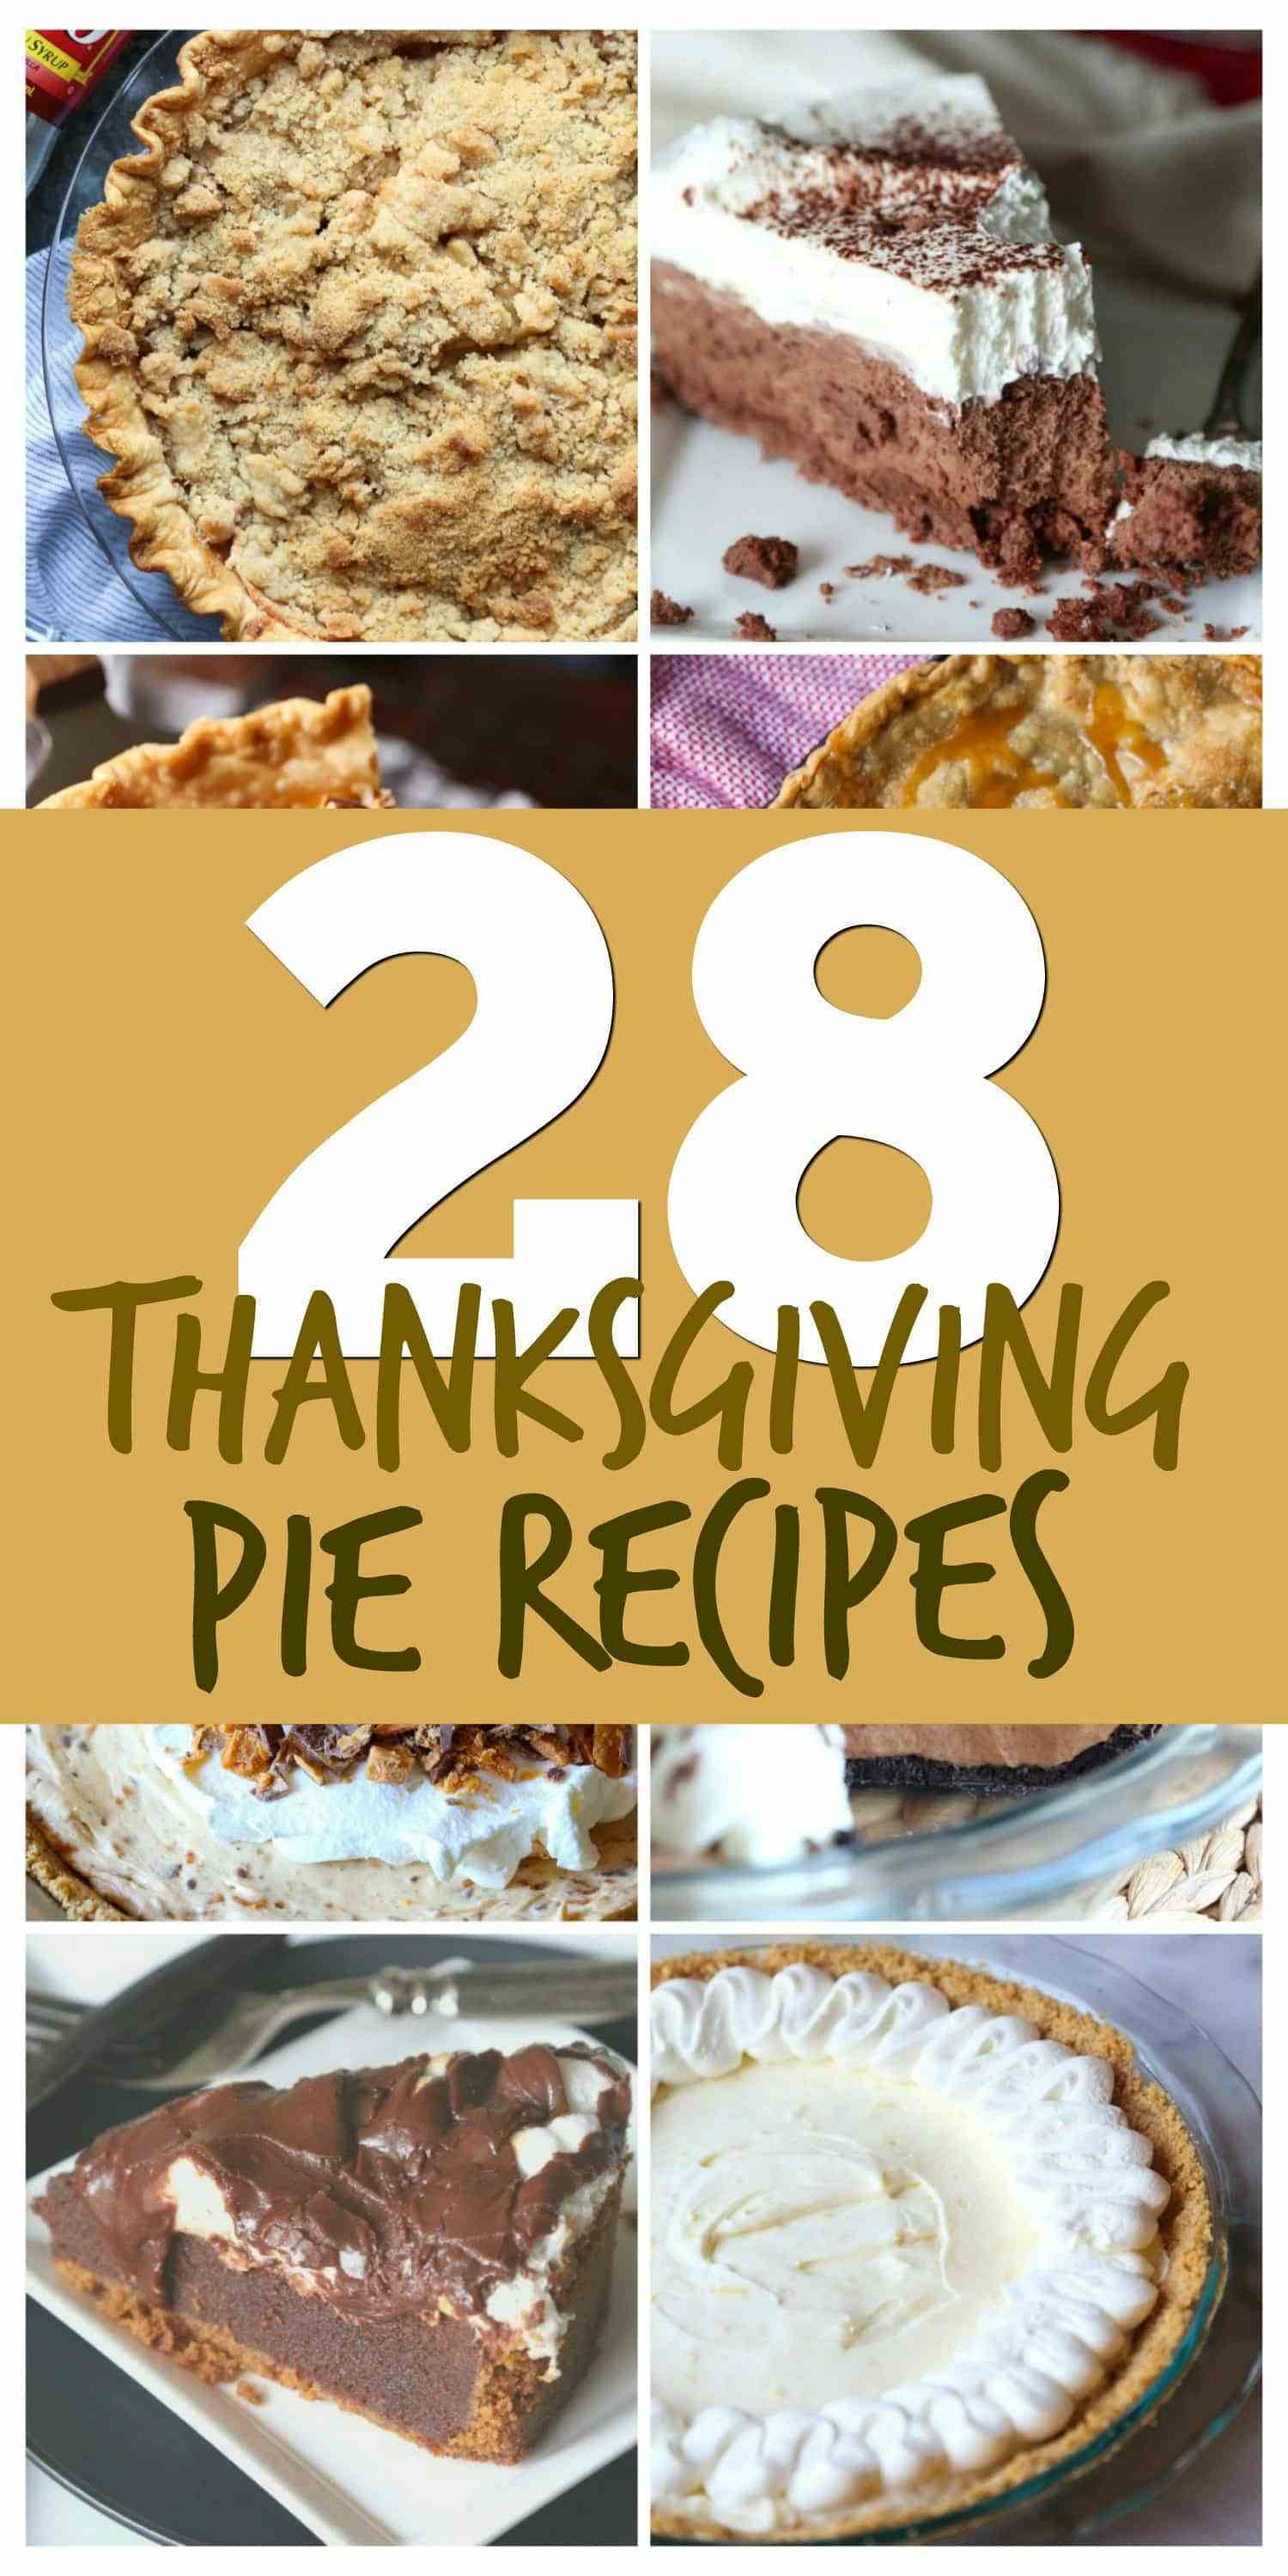 Thanksgiving Pie Recipes
 28 Thanksgiving Pie Recipes Cookies and Cups